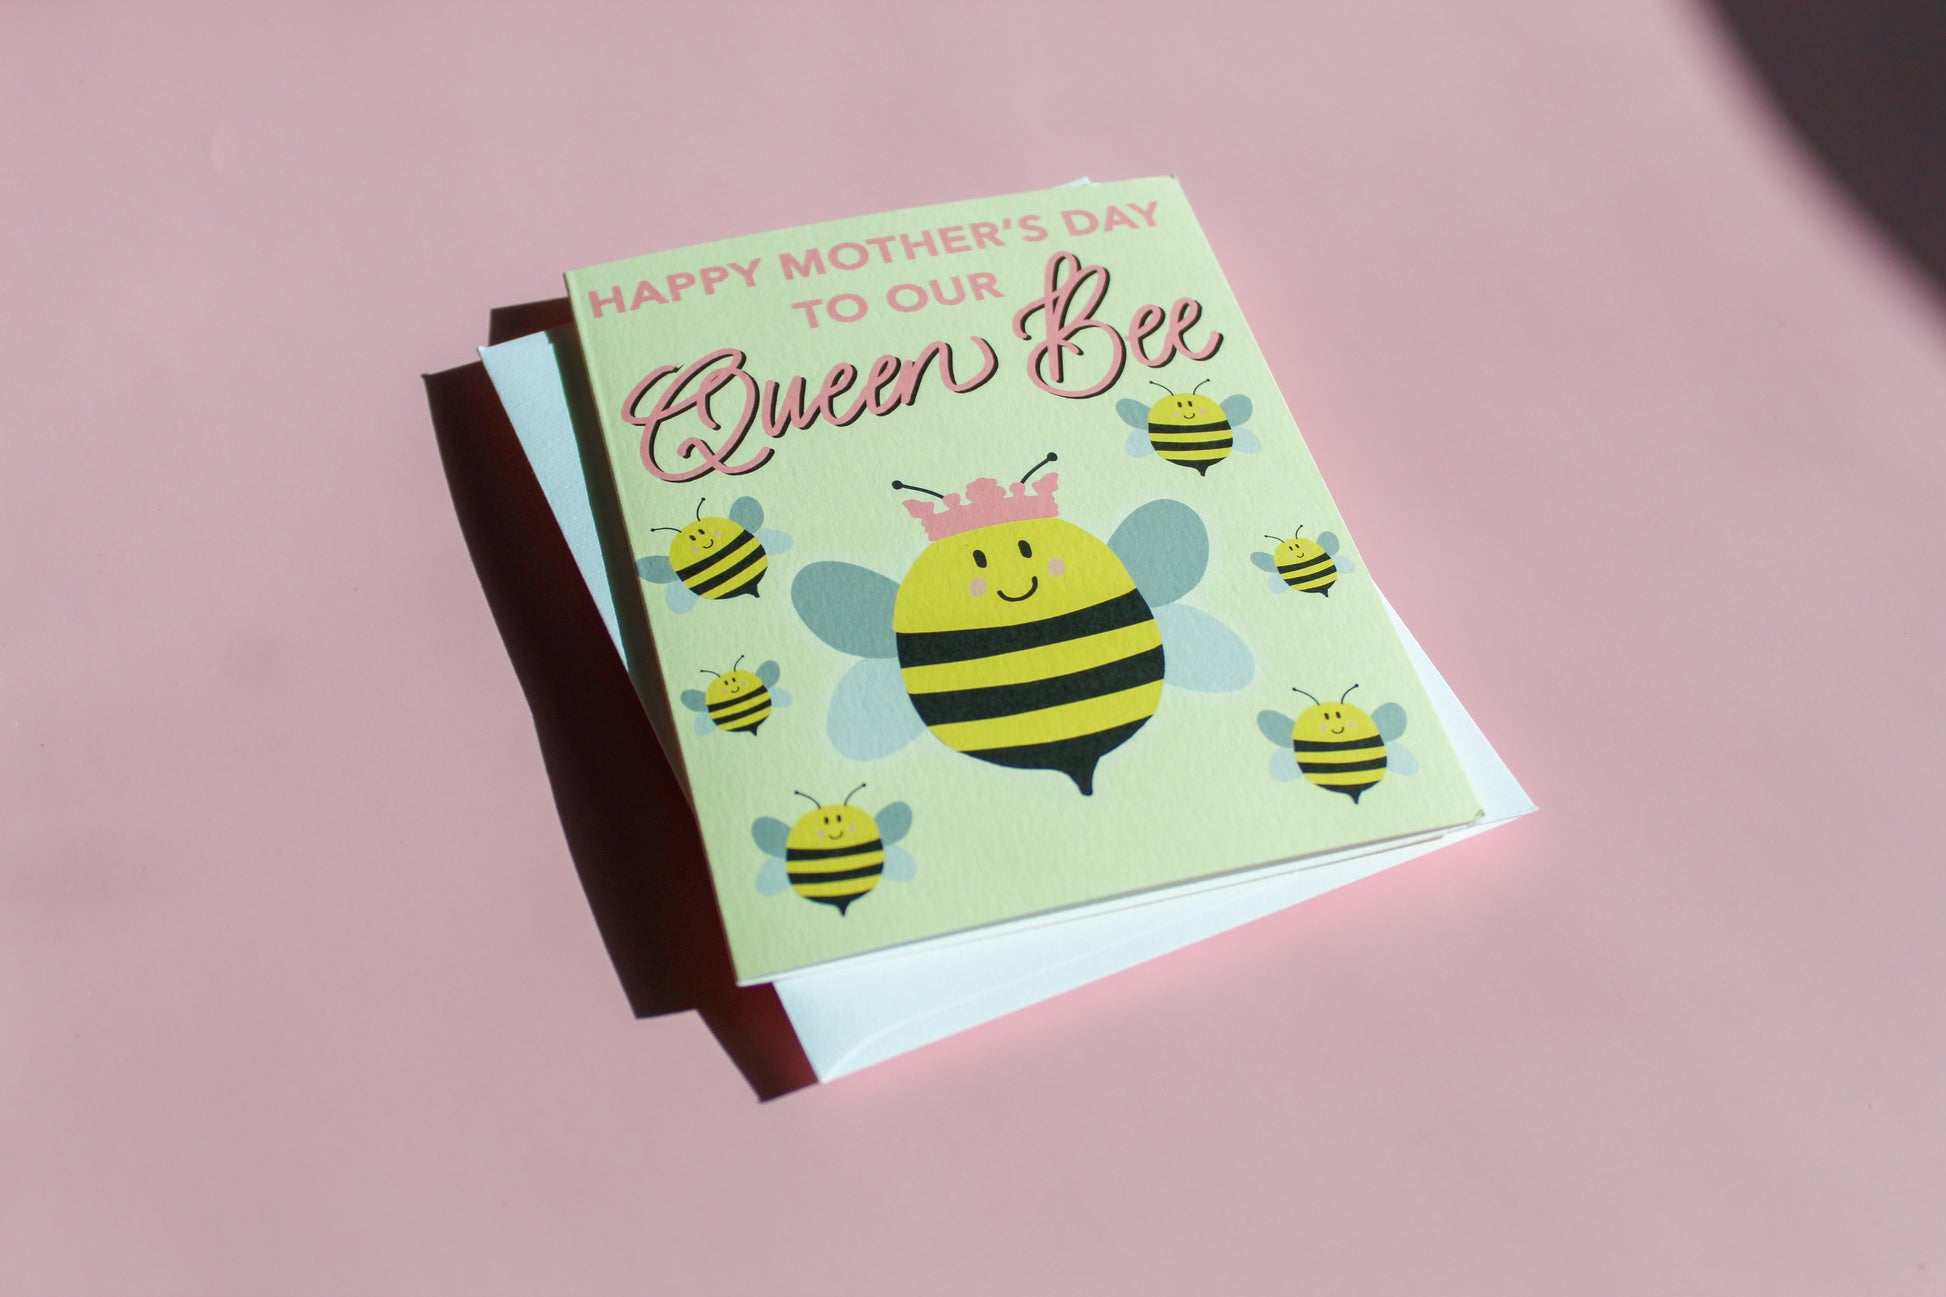 Our "Happy Mother's Day to our Queen Bee!" Mother's Day card features hand drawn queen bees on a yellow background - it is perfect for a mom, grandmother or any matriarch! Each card is folded to 4.25" tall by 5.5" wide, is blank inside and comes with a matching white envelope. Cards are packaged in cellophane sleeves.